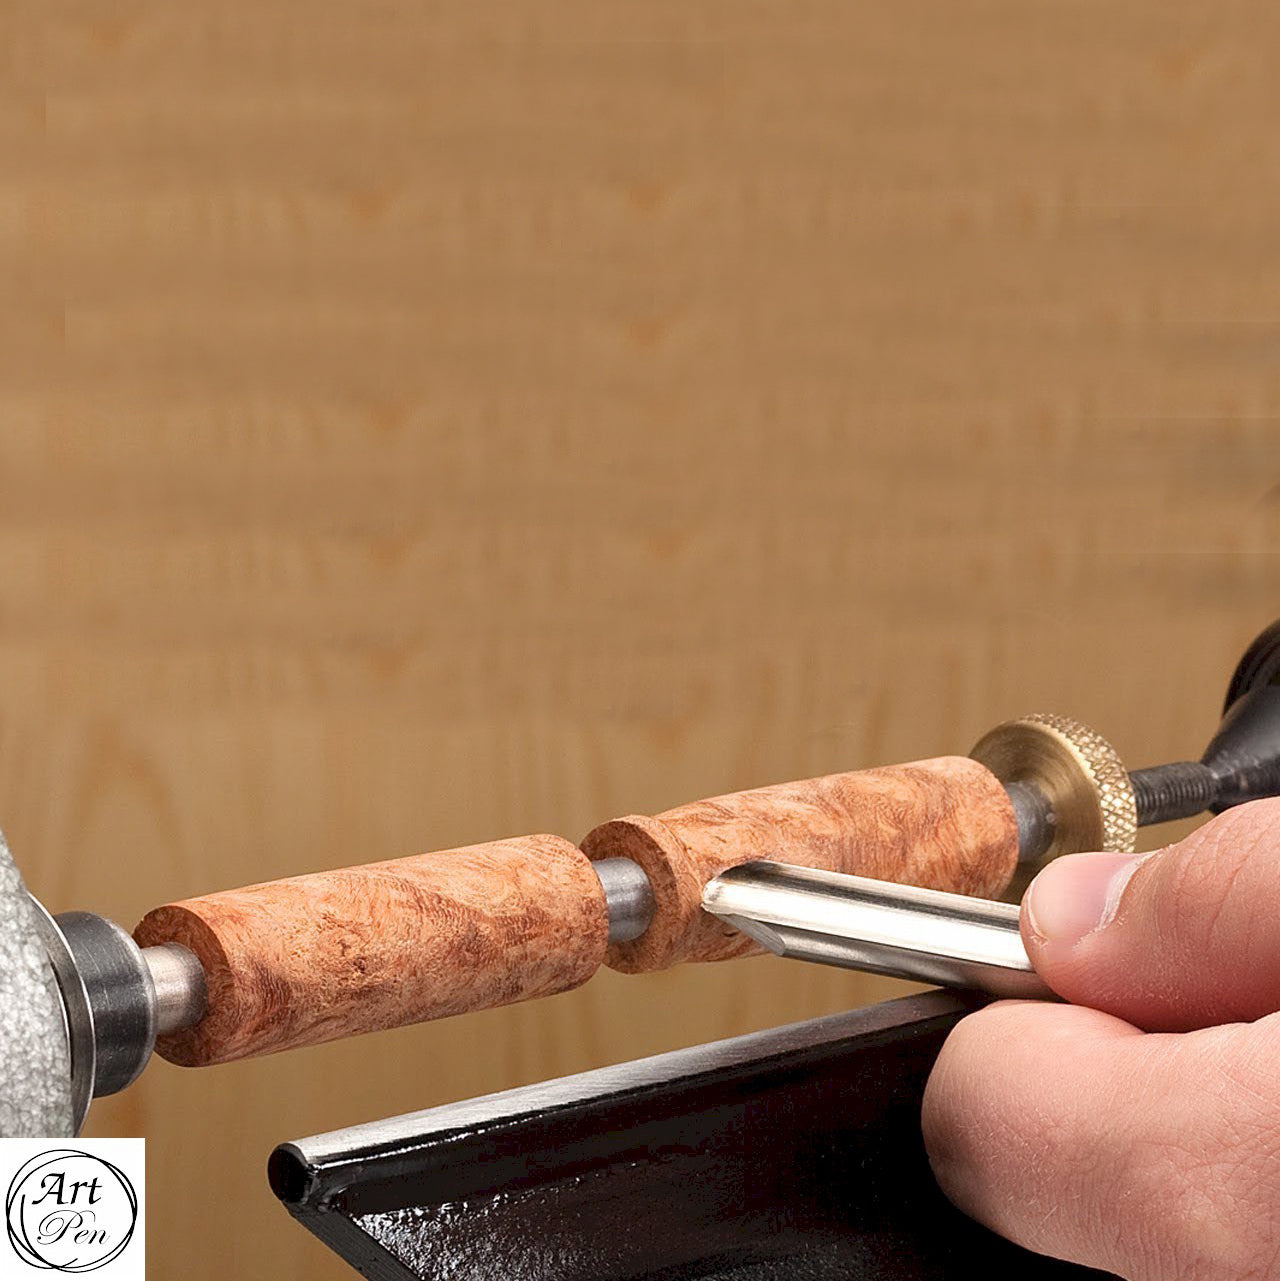 ART-PEN: Handcrafted Luxury Rollerball Pen - Milano - Antique Pewter with True Stone White Gold body - Artistica.com